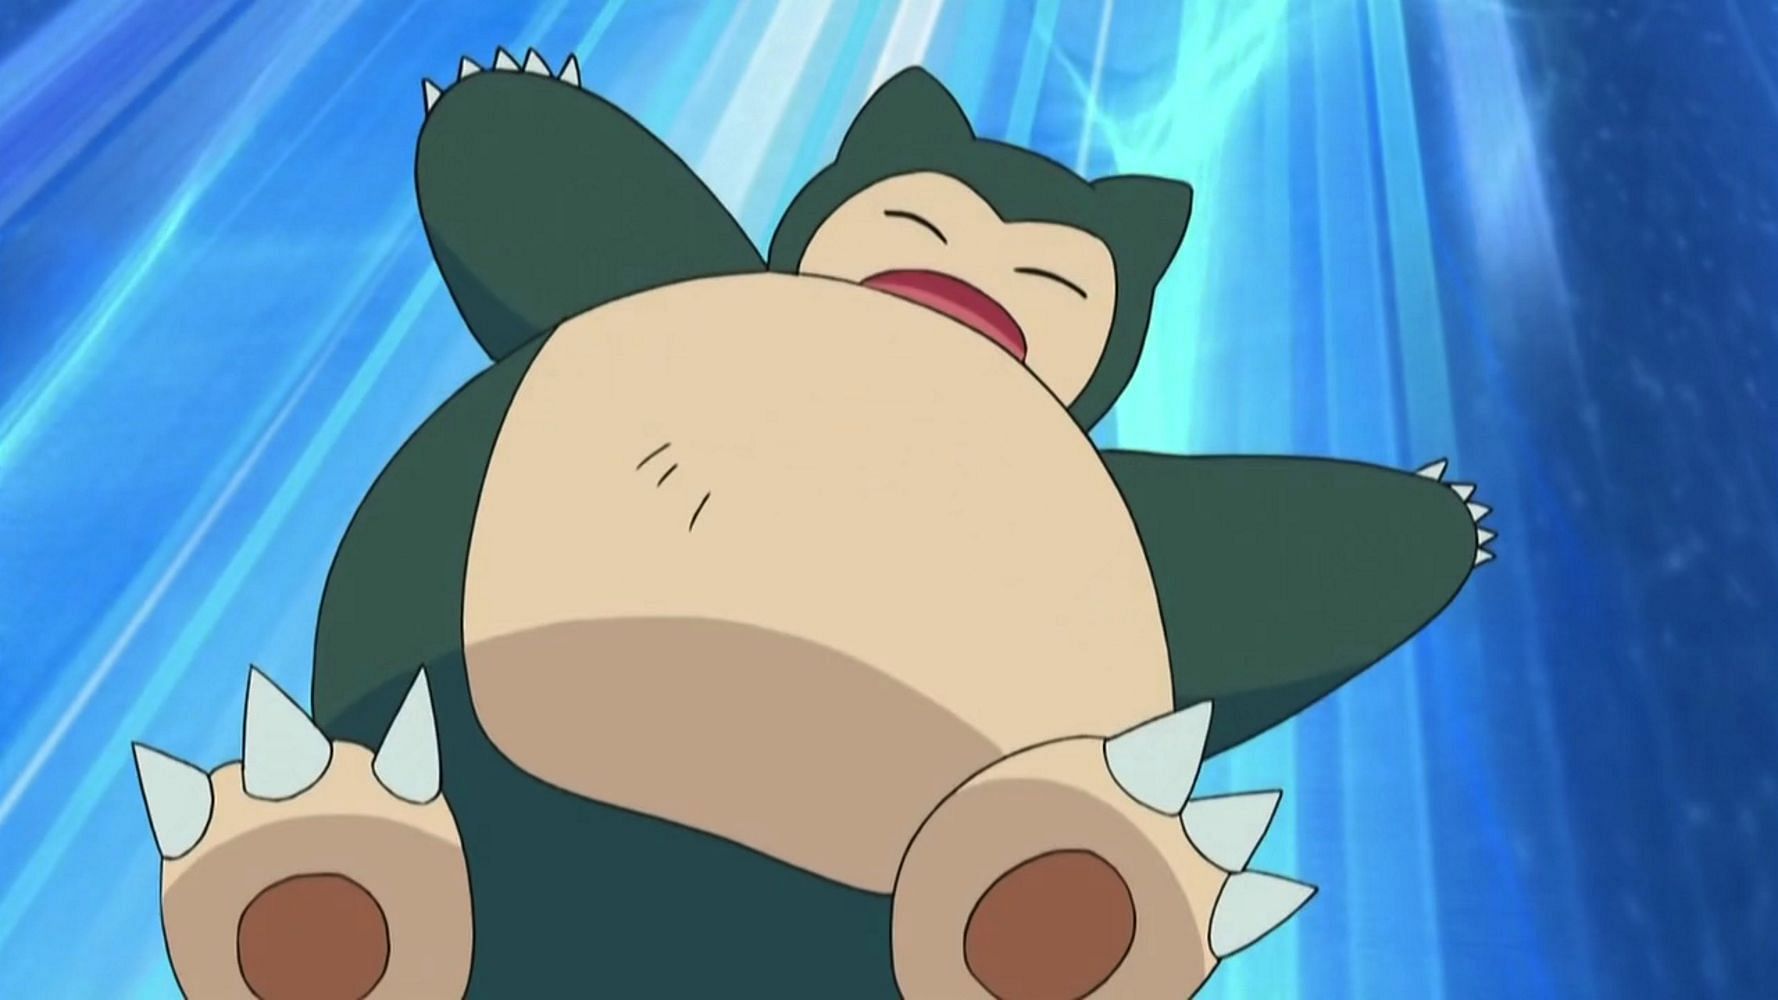 Snorlax was powerful back in the day (Image via OLM, Inc)